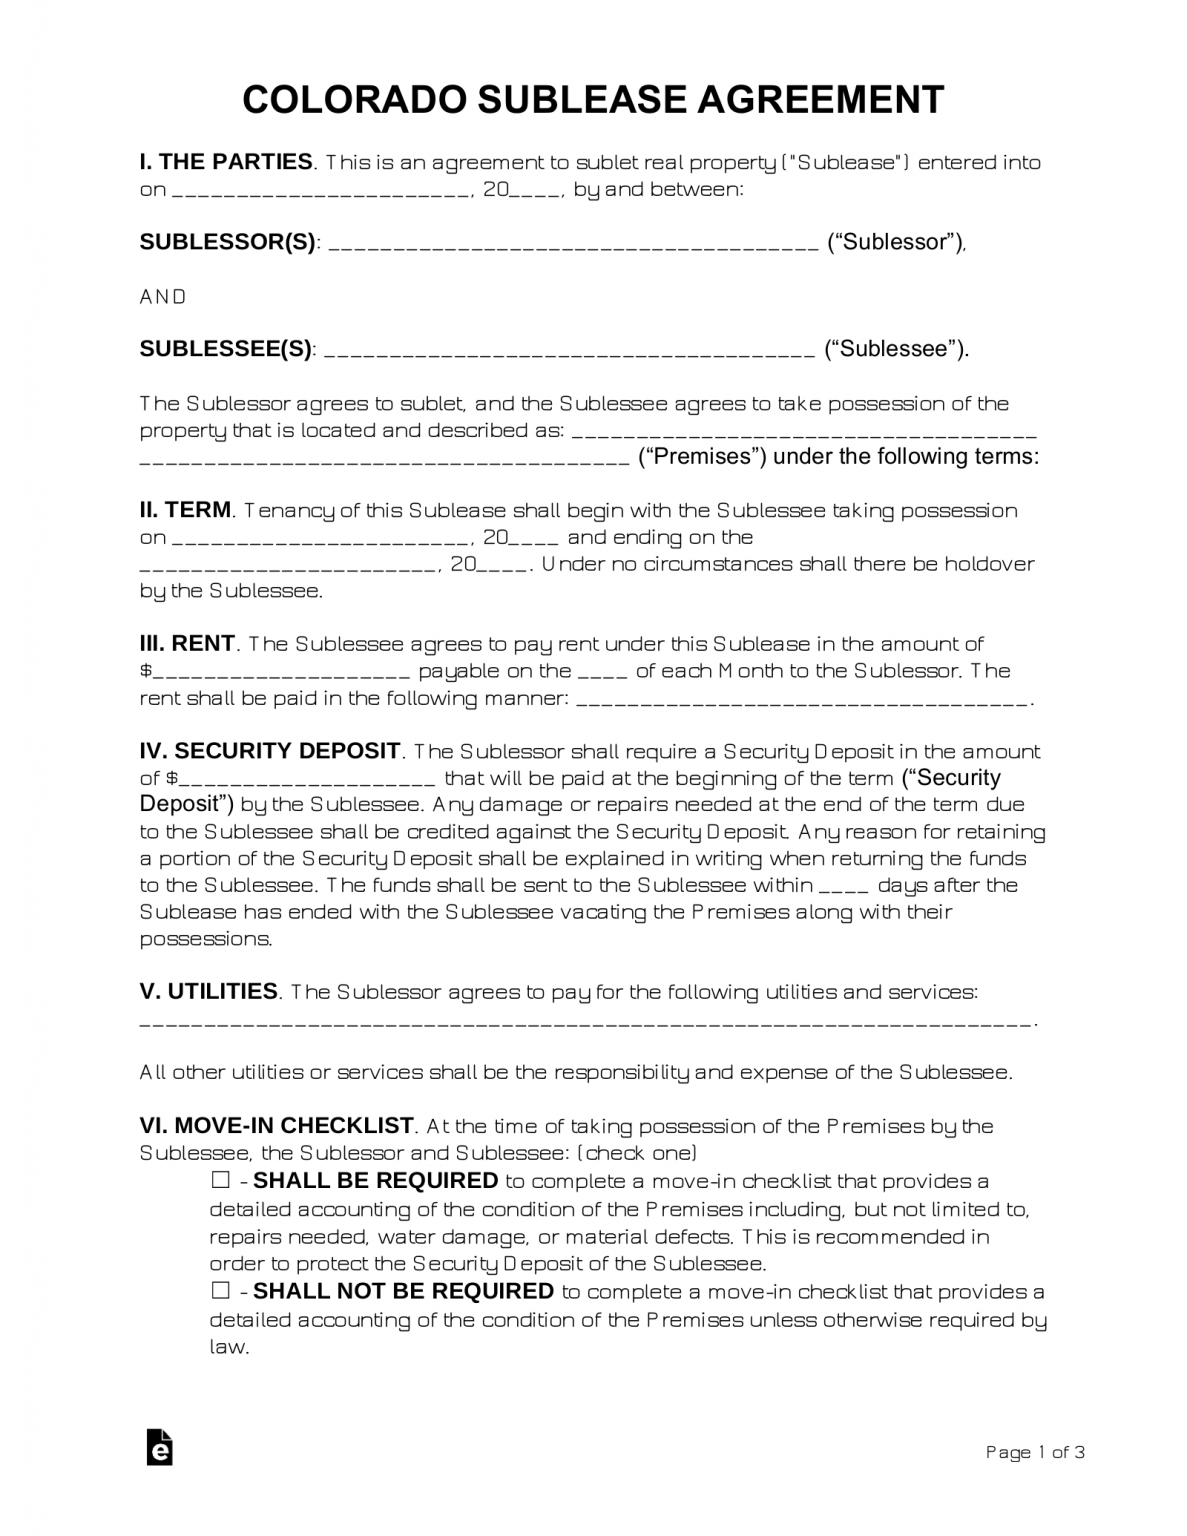 free-colorado-sublease-agreement-template-pdf-word-eforms